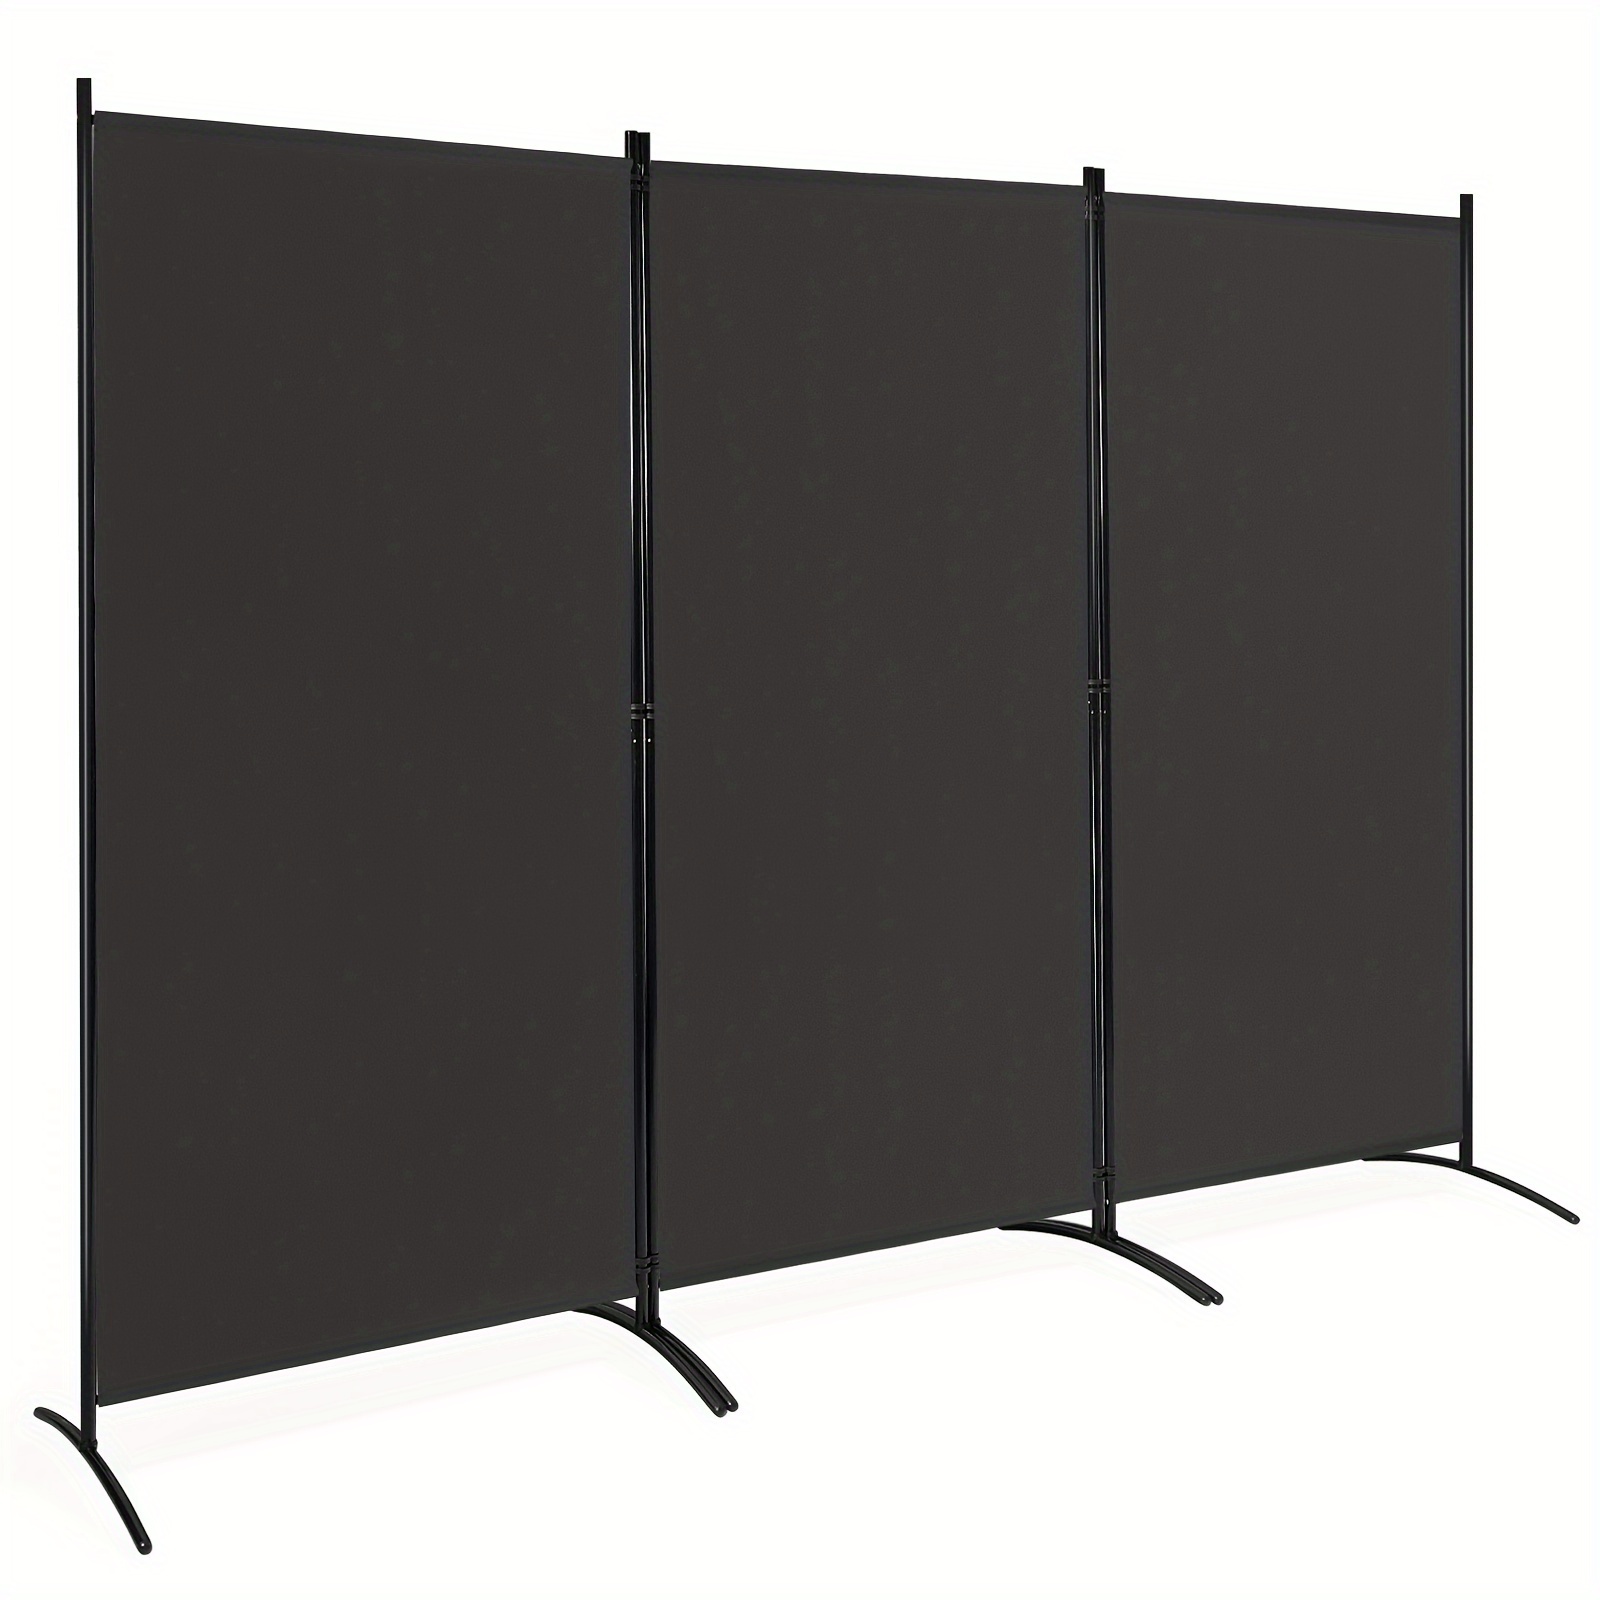 

1pc 3-panel Room Divider Folding Privacy Partition Screen For Office Room, Foldable And Space Saving Design